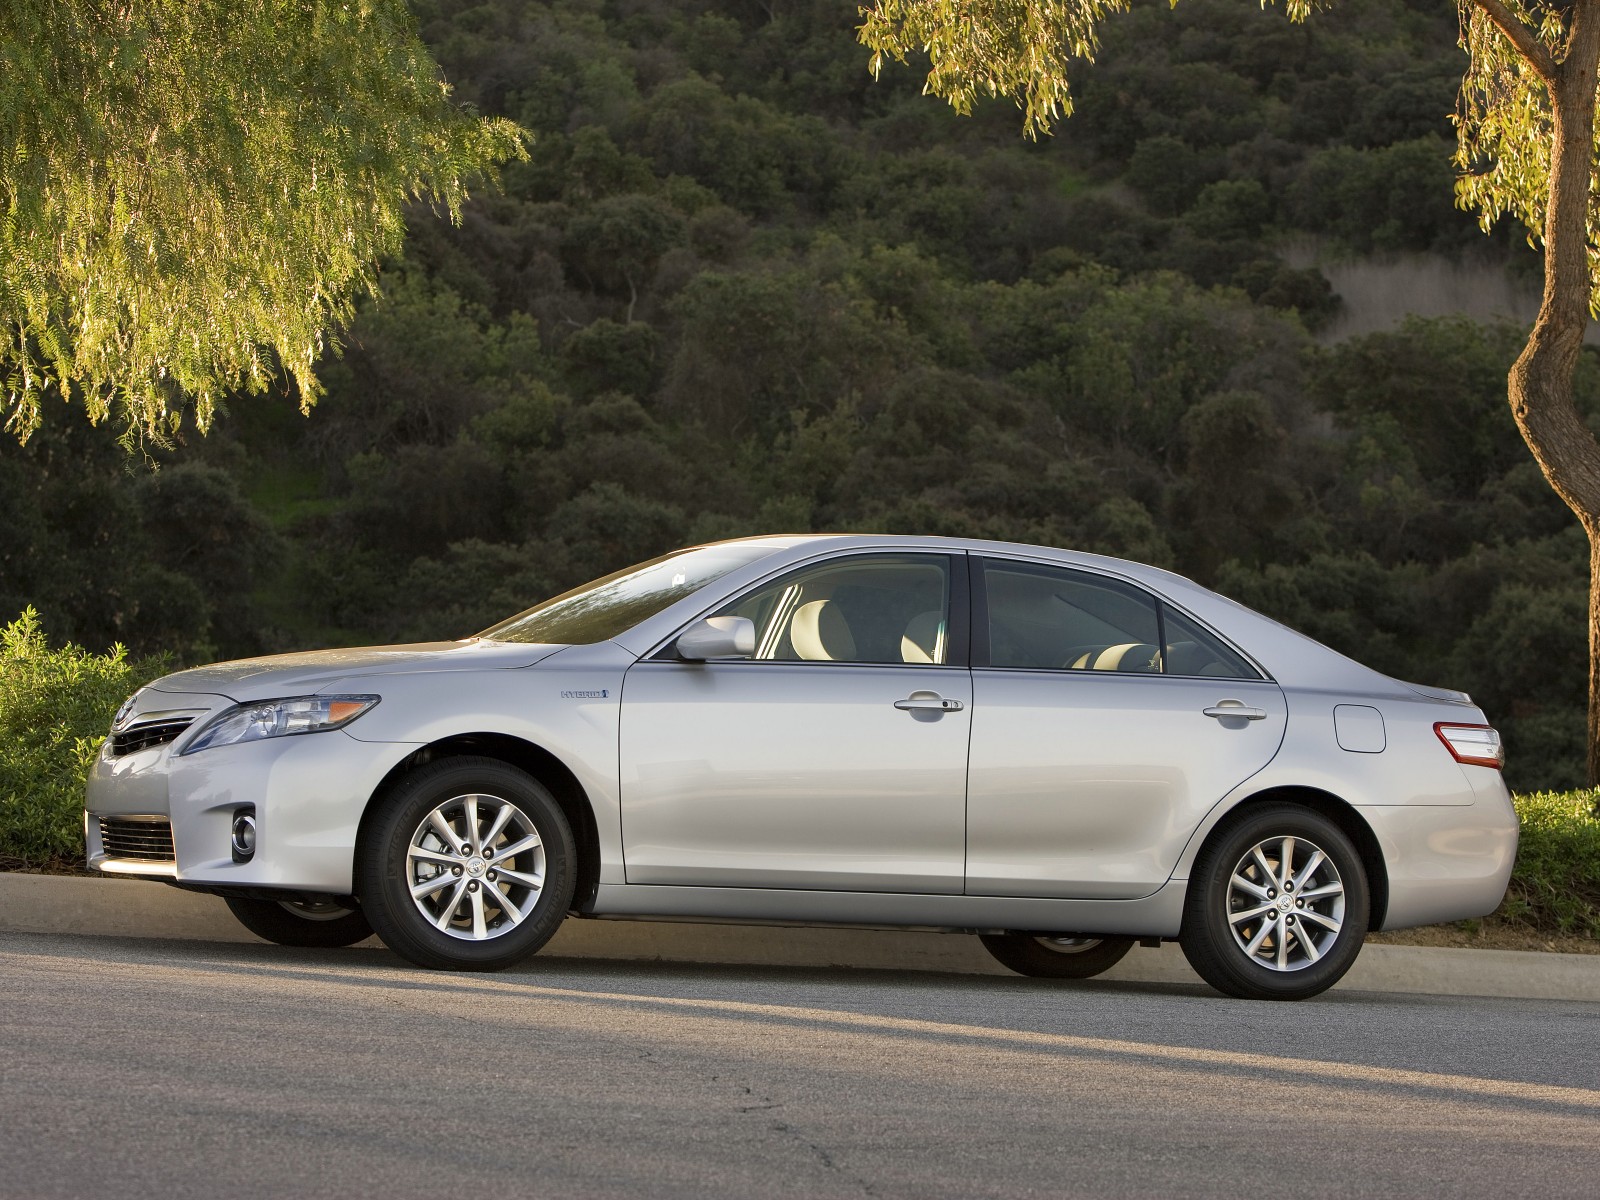 2010 Toyota Camry Hybrid Pictures